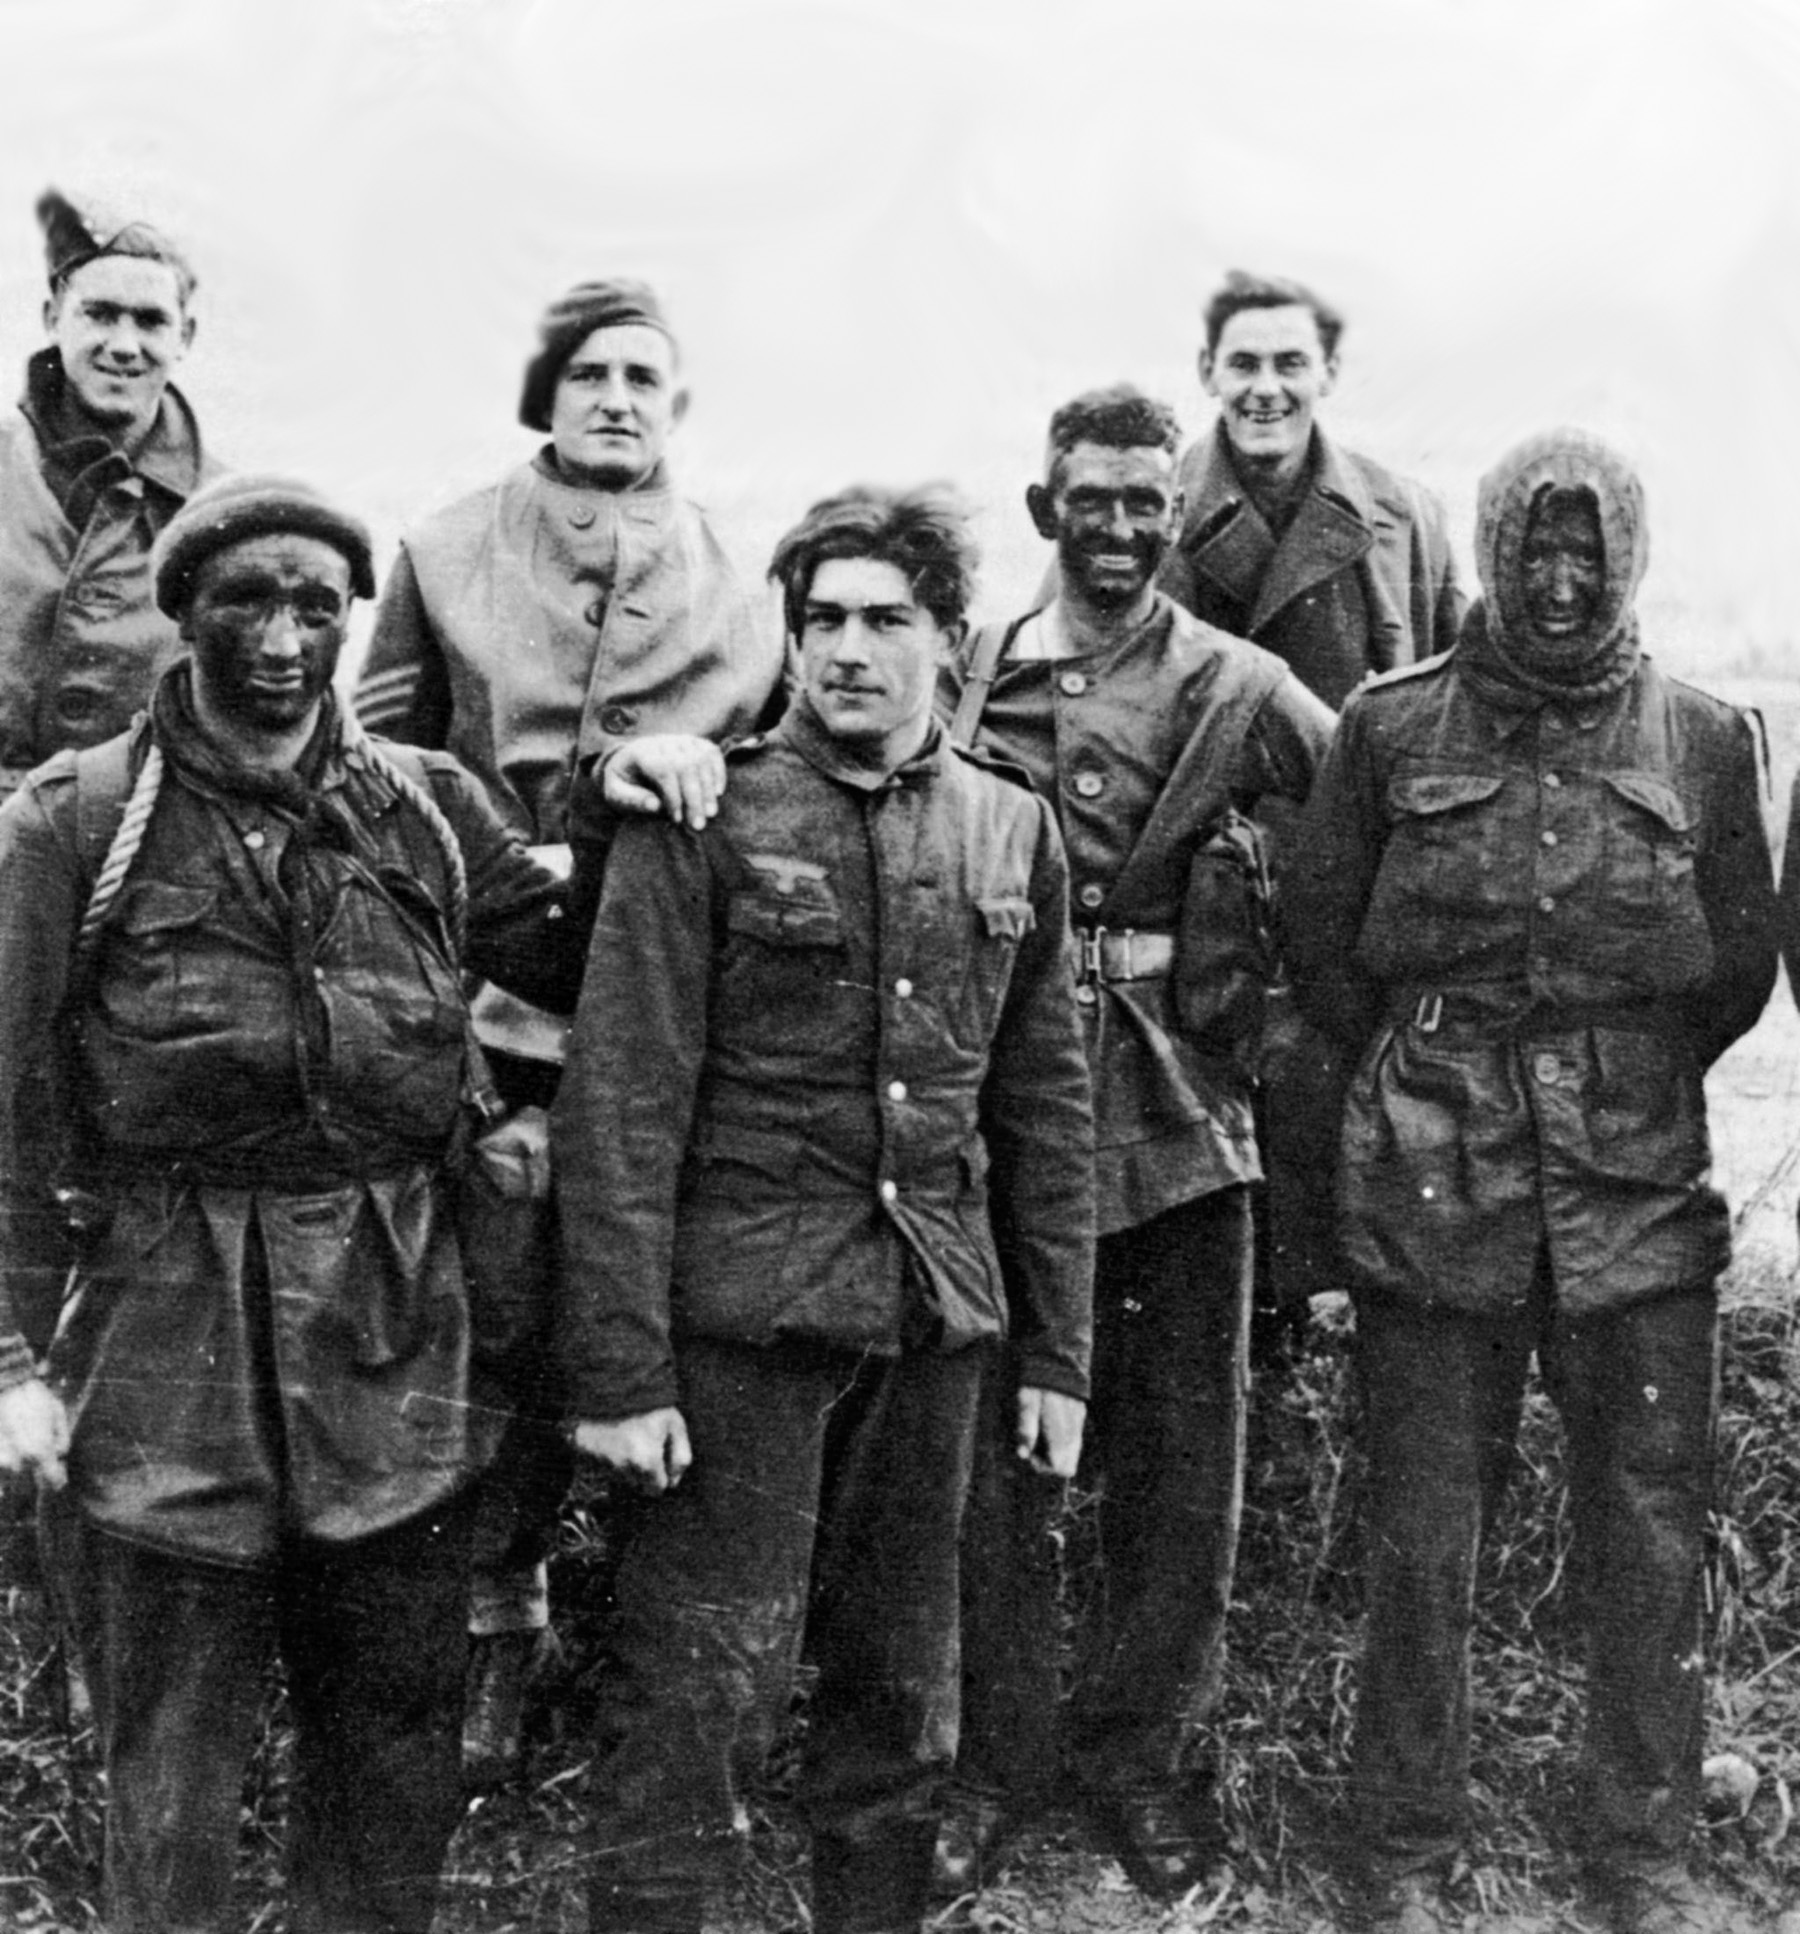 Royal Marine Commandos, some with blackened faces, pose with a captured German soldier who appears glad to be out of the fighting in Italy.